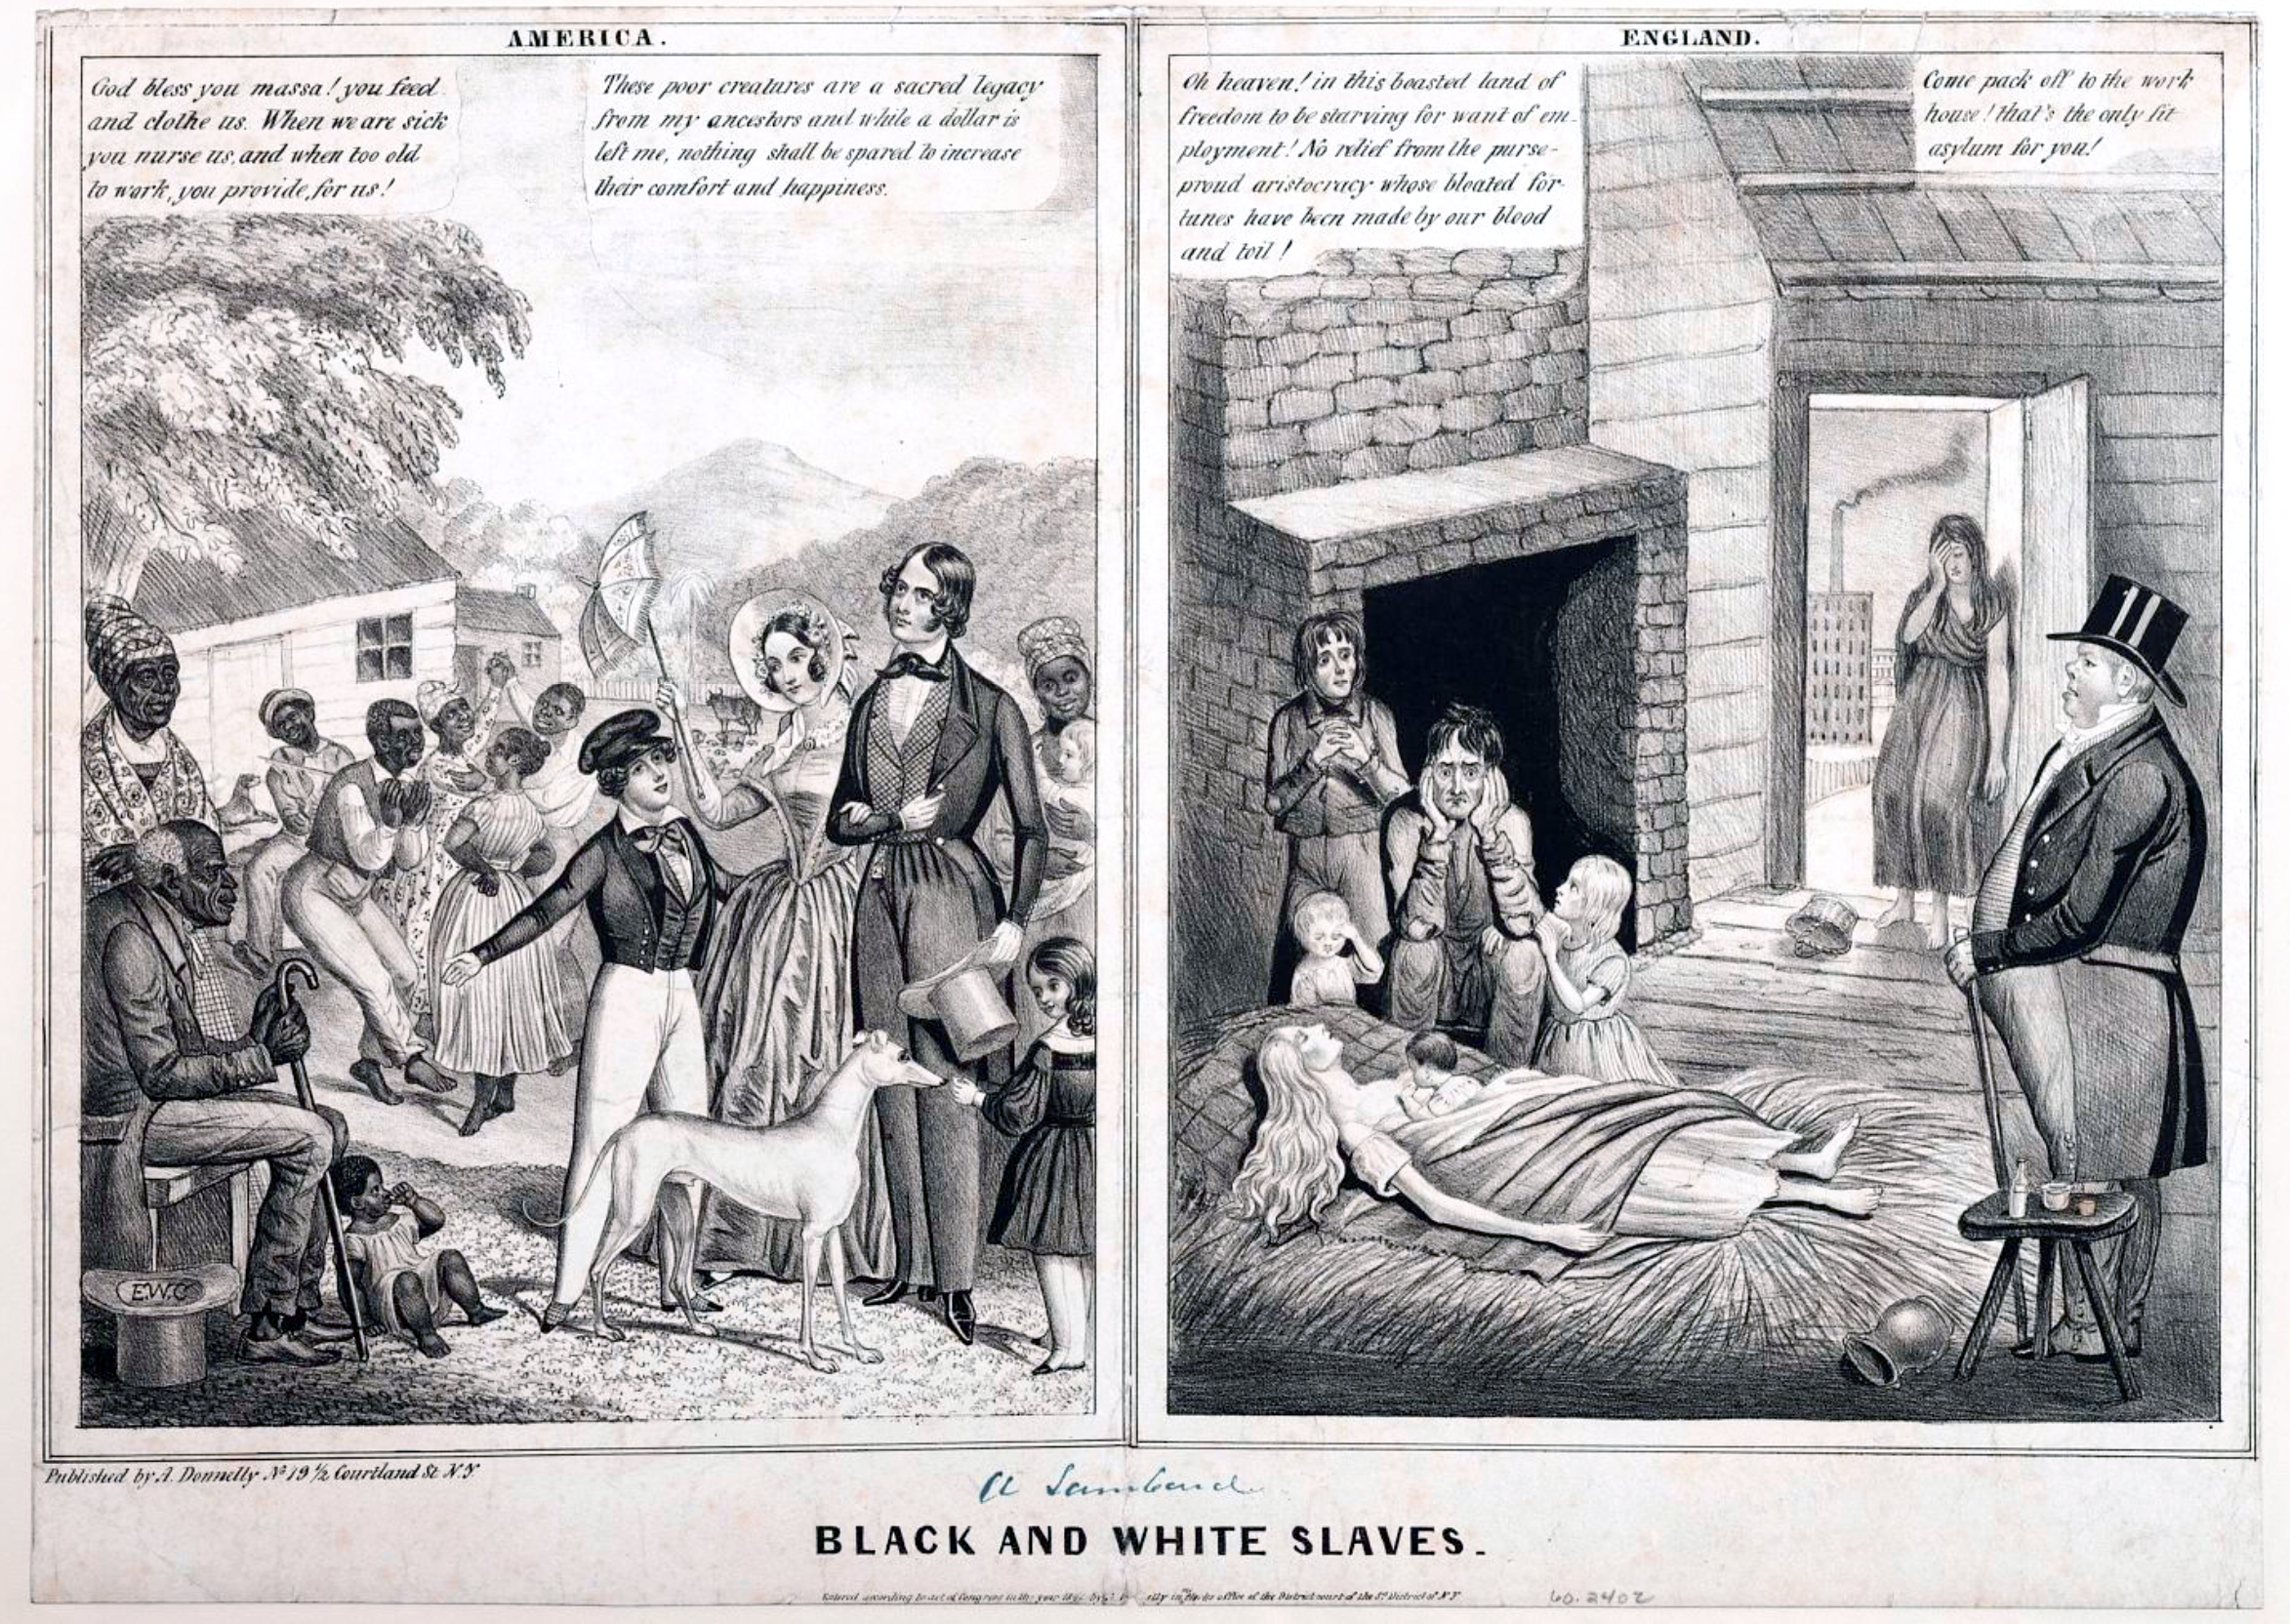 Edward Williams Clay, America (Black and White Slaves), c. 1841. This cartoon contrasts the “happy, well cared-for” enslaved Black people of the American south with the “wage slaves” of England’s factories.